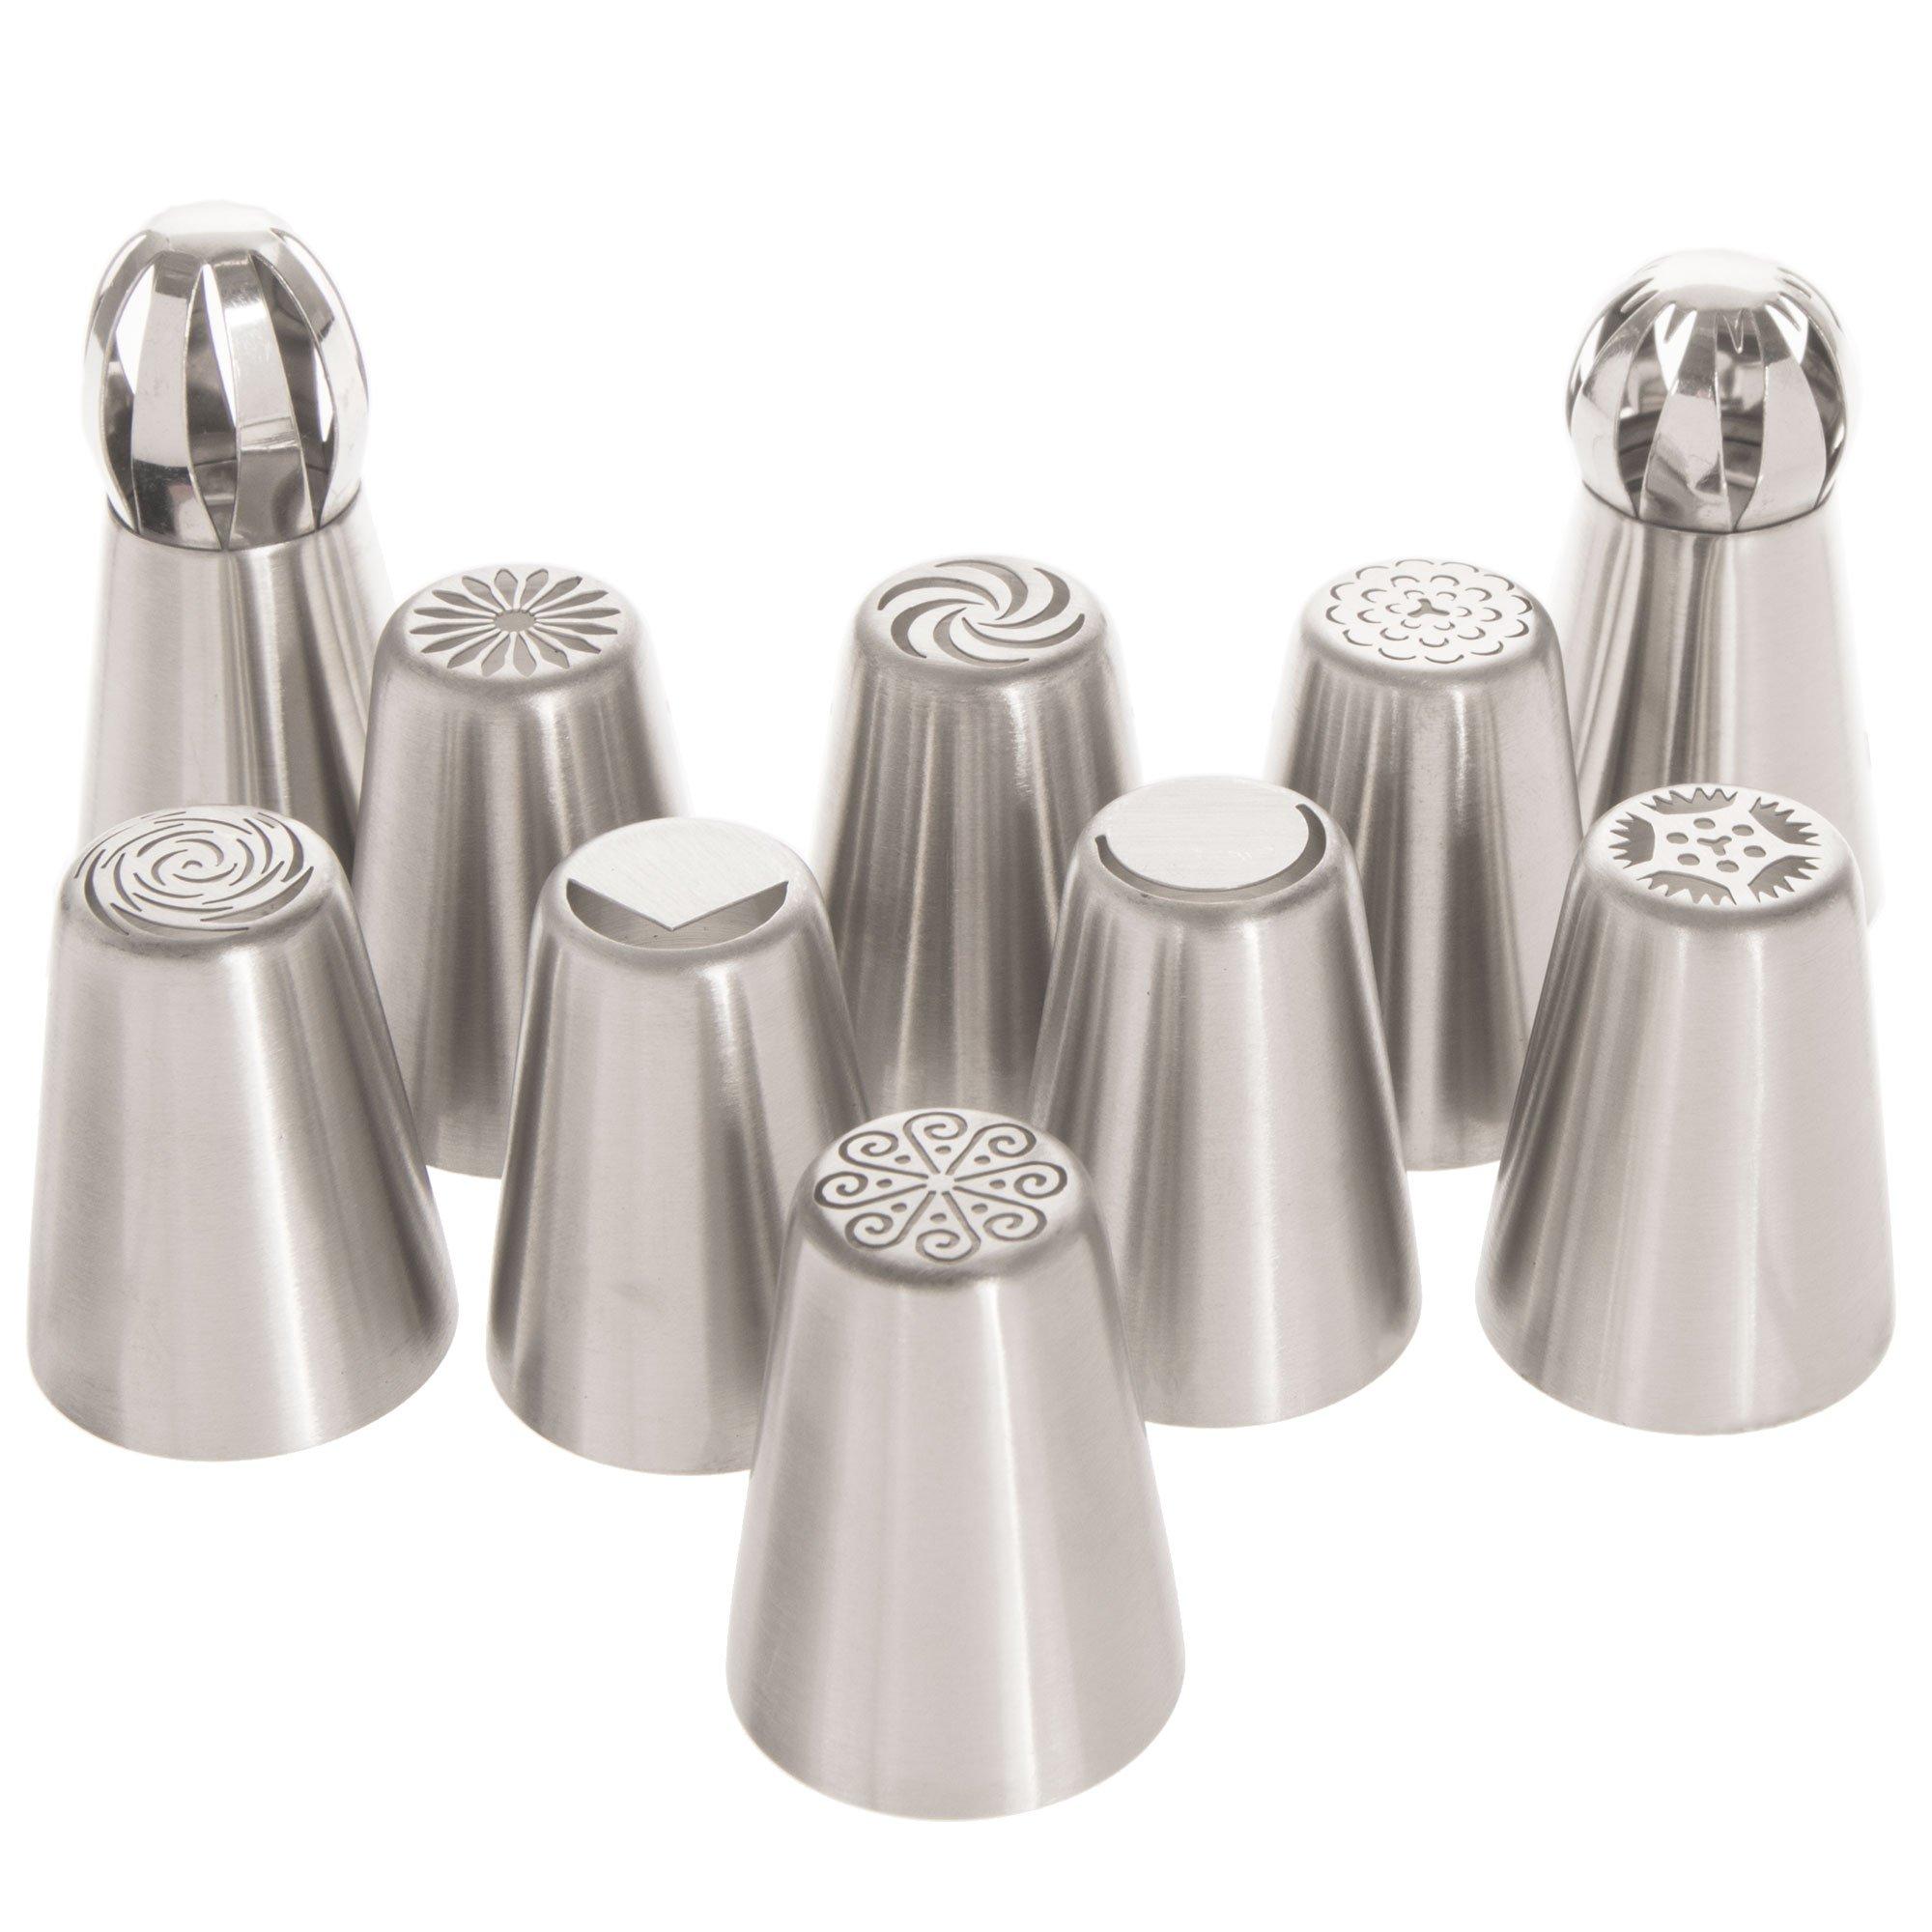 Russian Nozzle Piping Tip Stainless Steel by Chef Collection 1, O7 